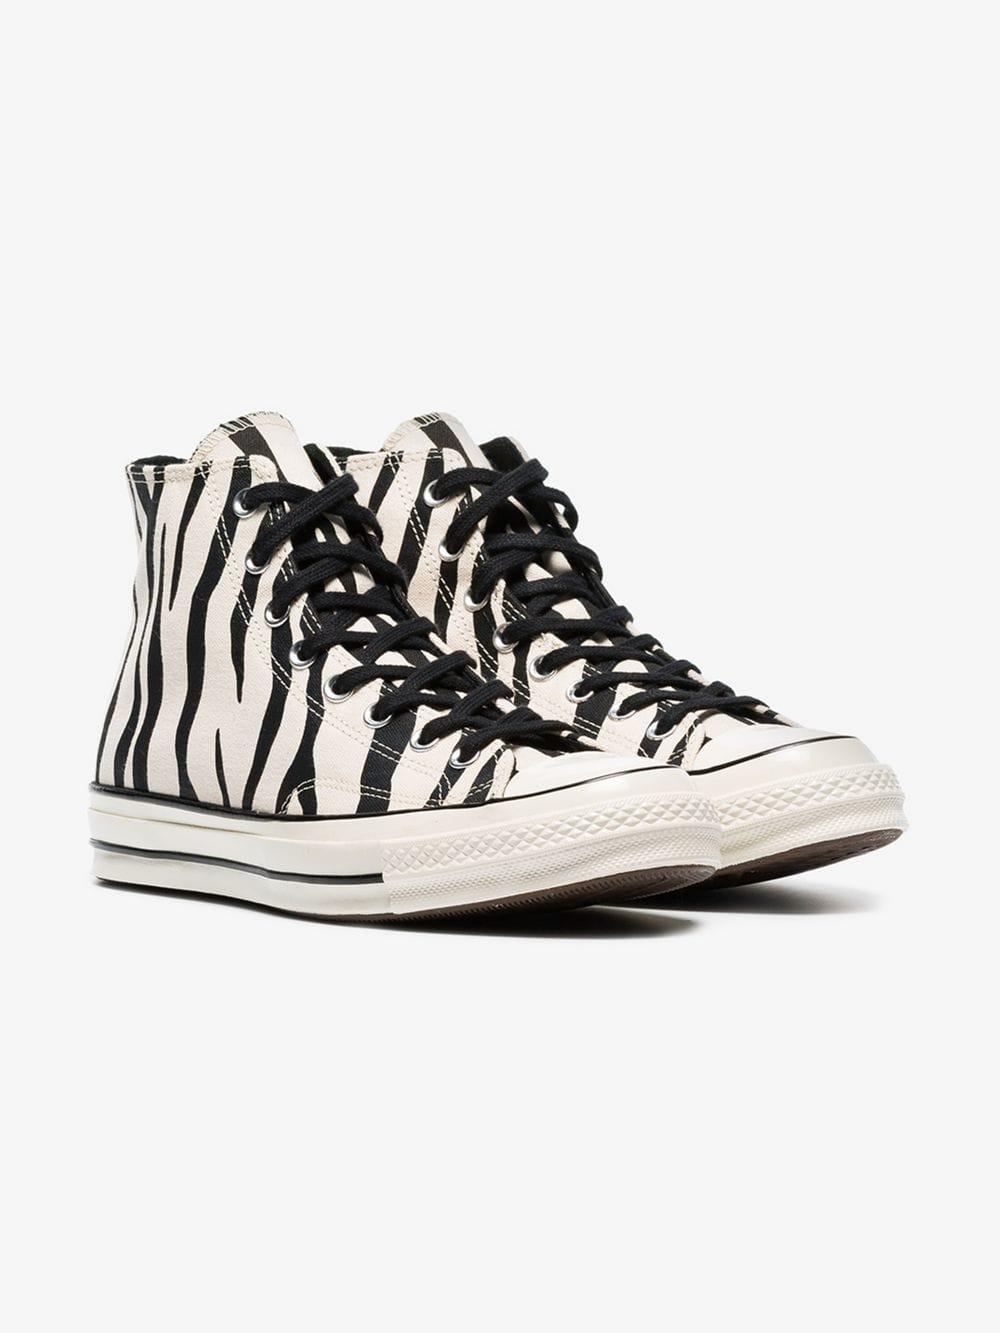 Converse Rubber Black And White Chuck Taylor All Stars 70s Zebra Print High  Top Sneakers for Men - Lyst